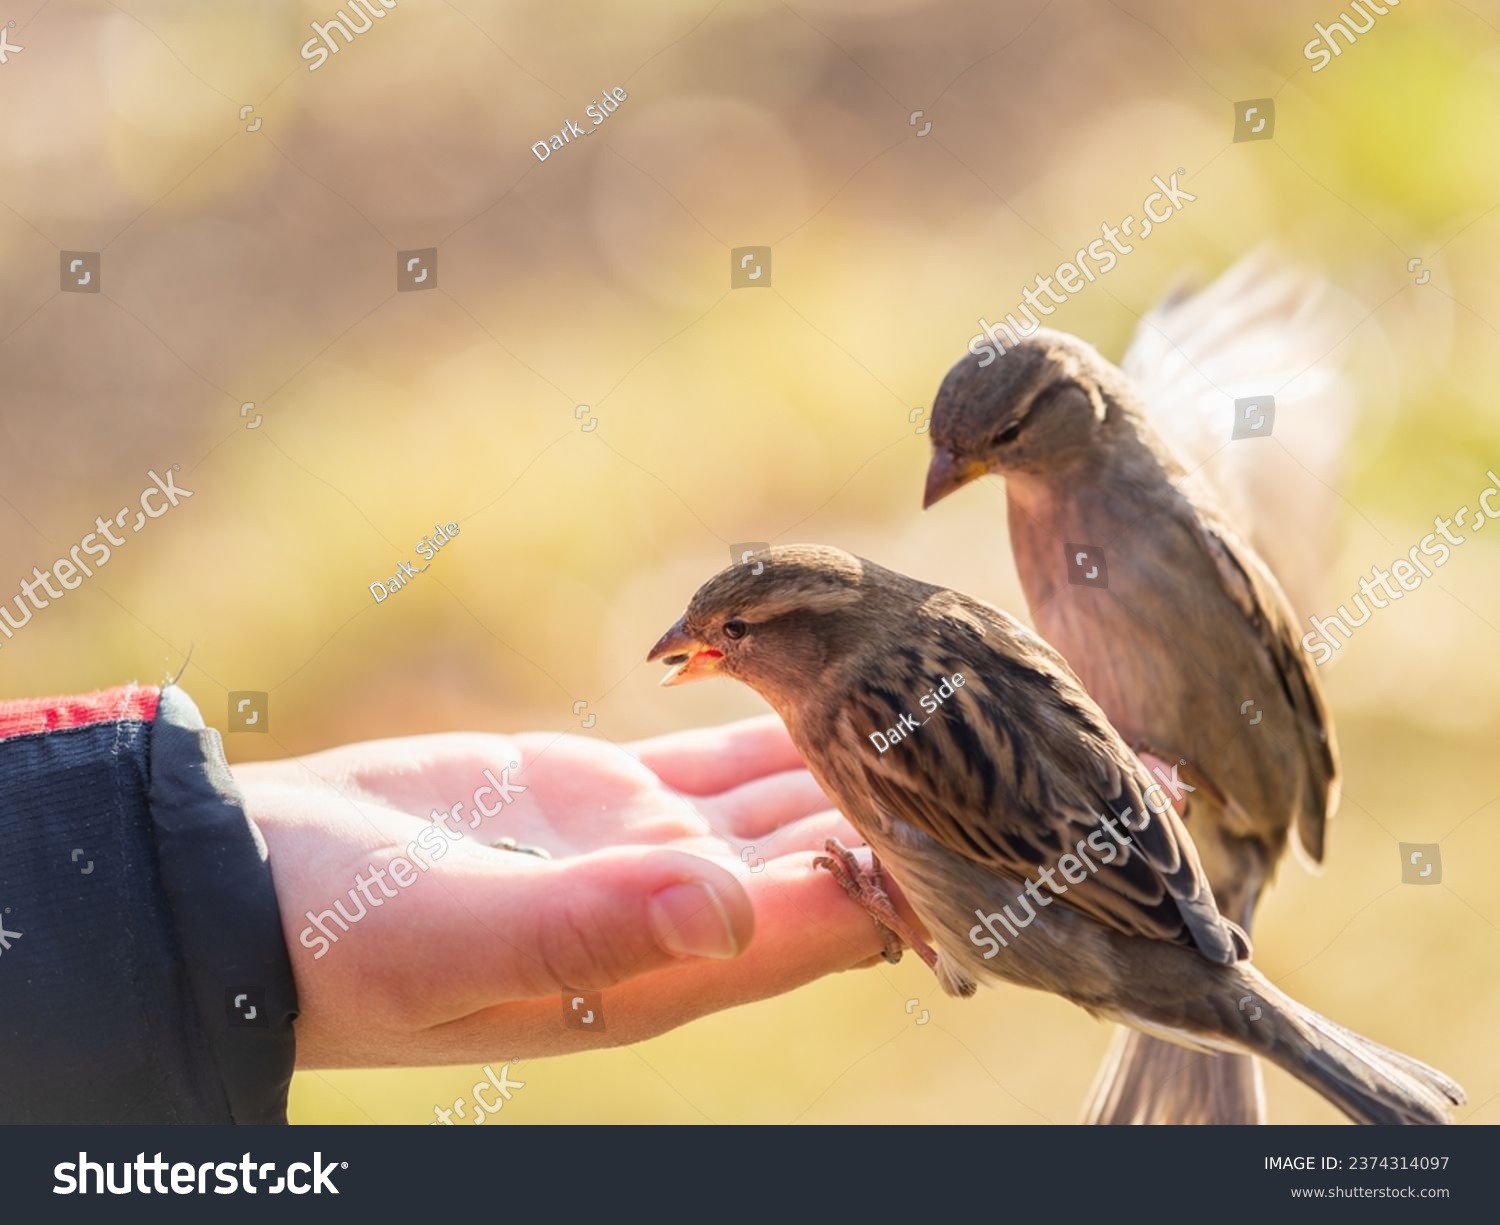 The boy feeds the birds with seeds from his hand. Sparrow eats seeds from the boy's hand The Sparrow sits on boy's hand. #2374314097